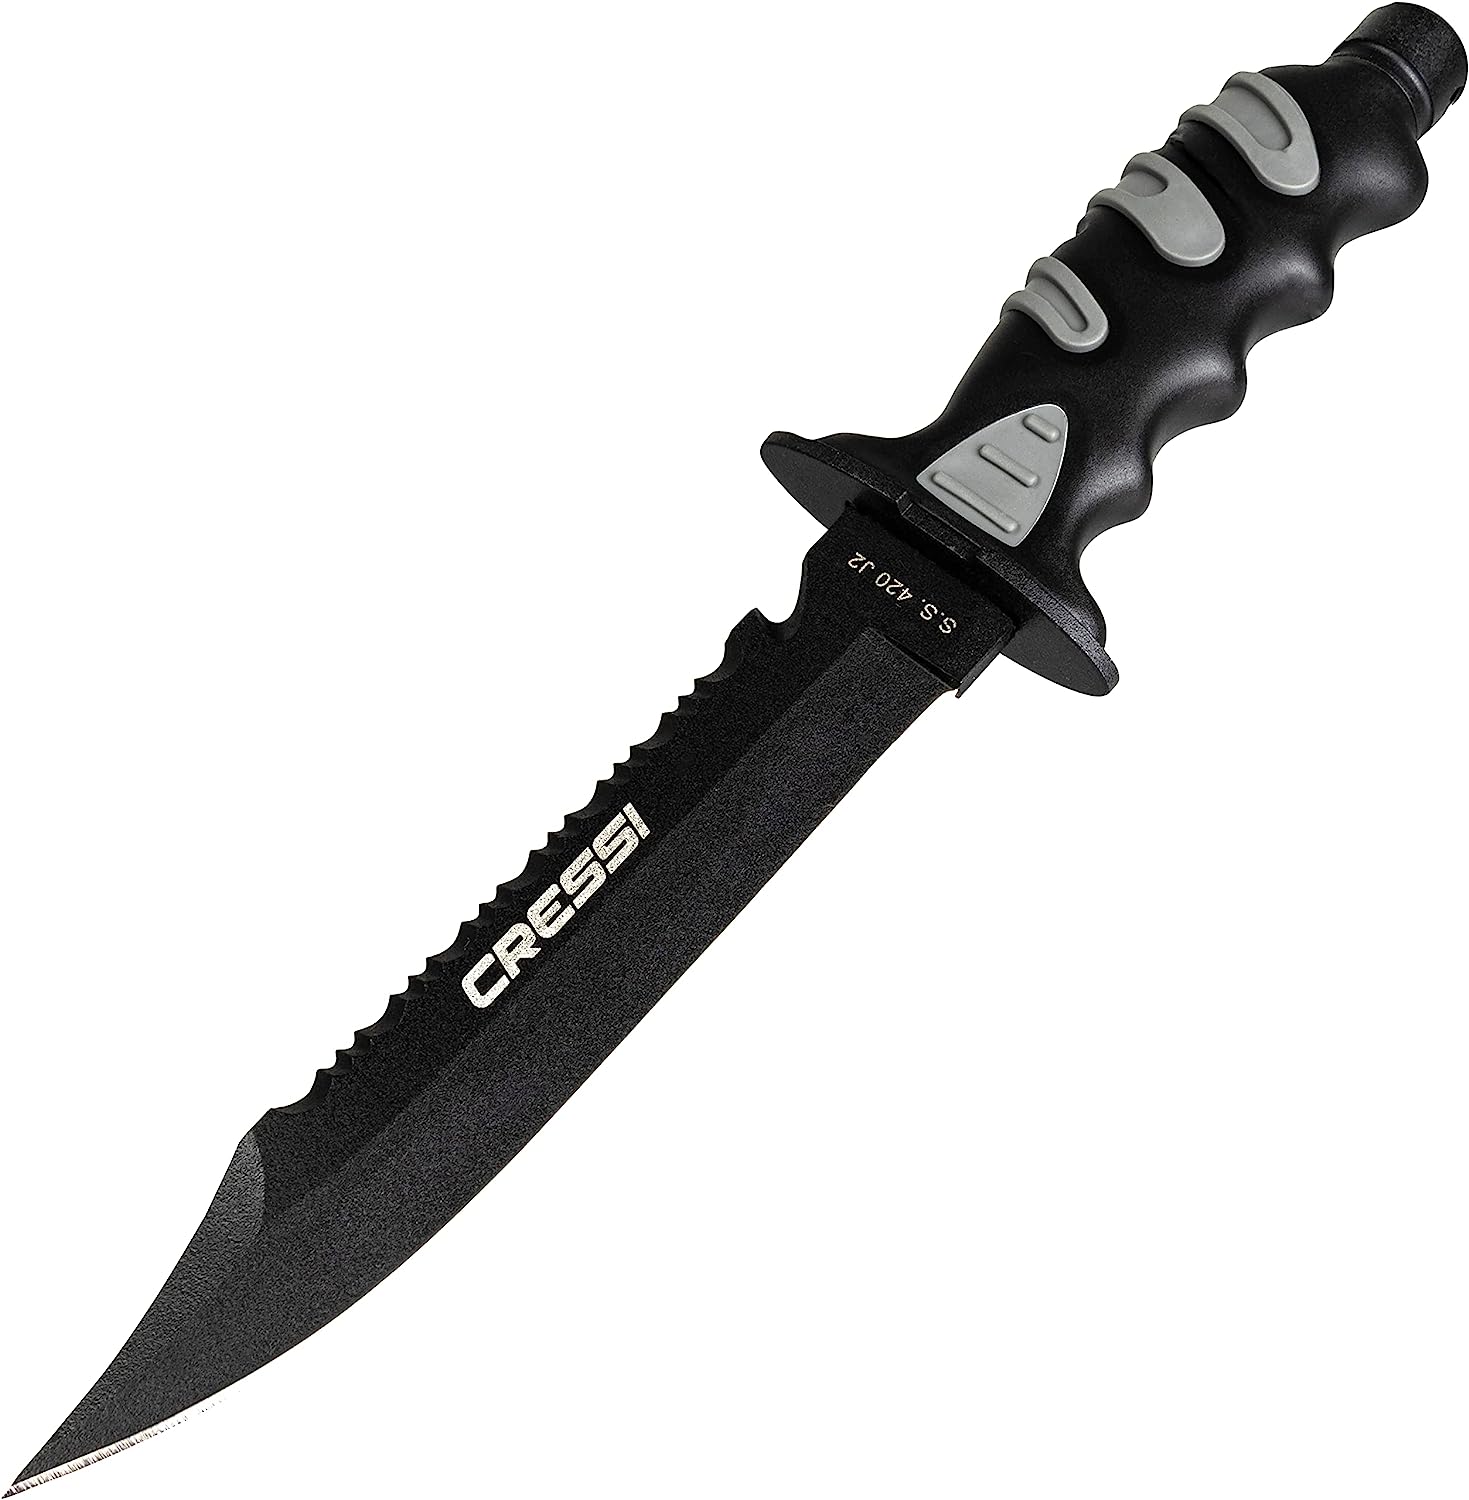 Cressi Giant Dive Knife